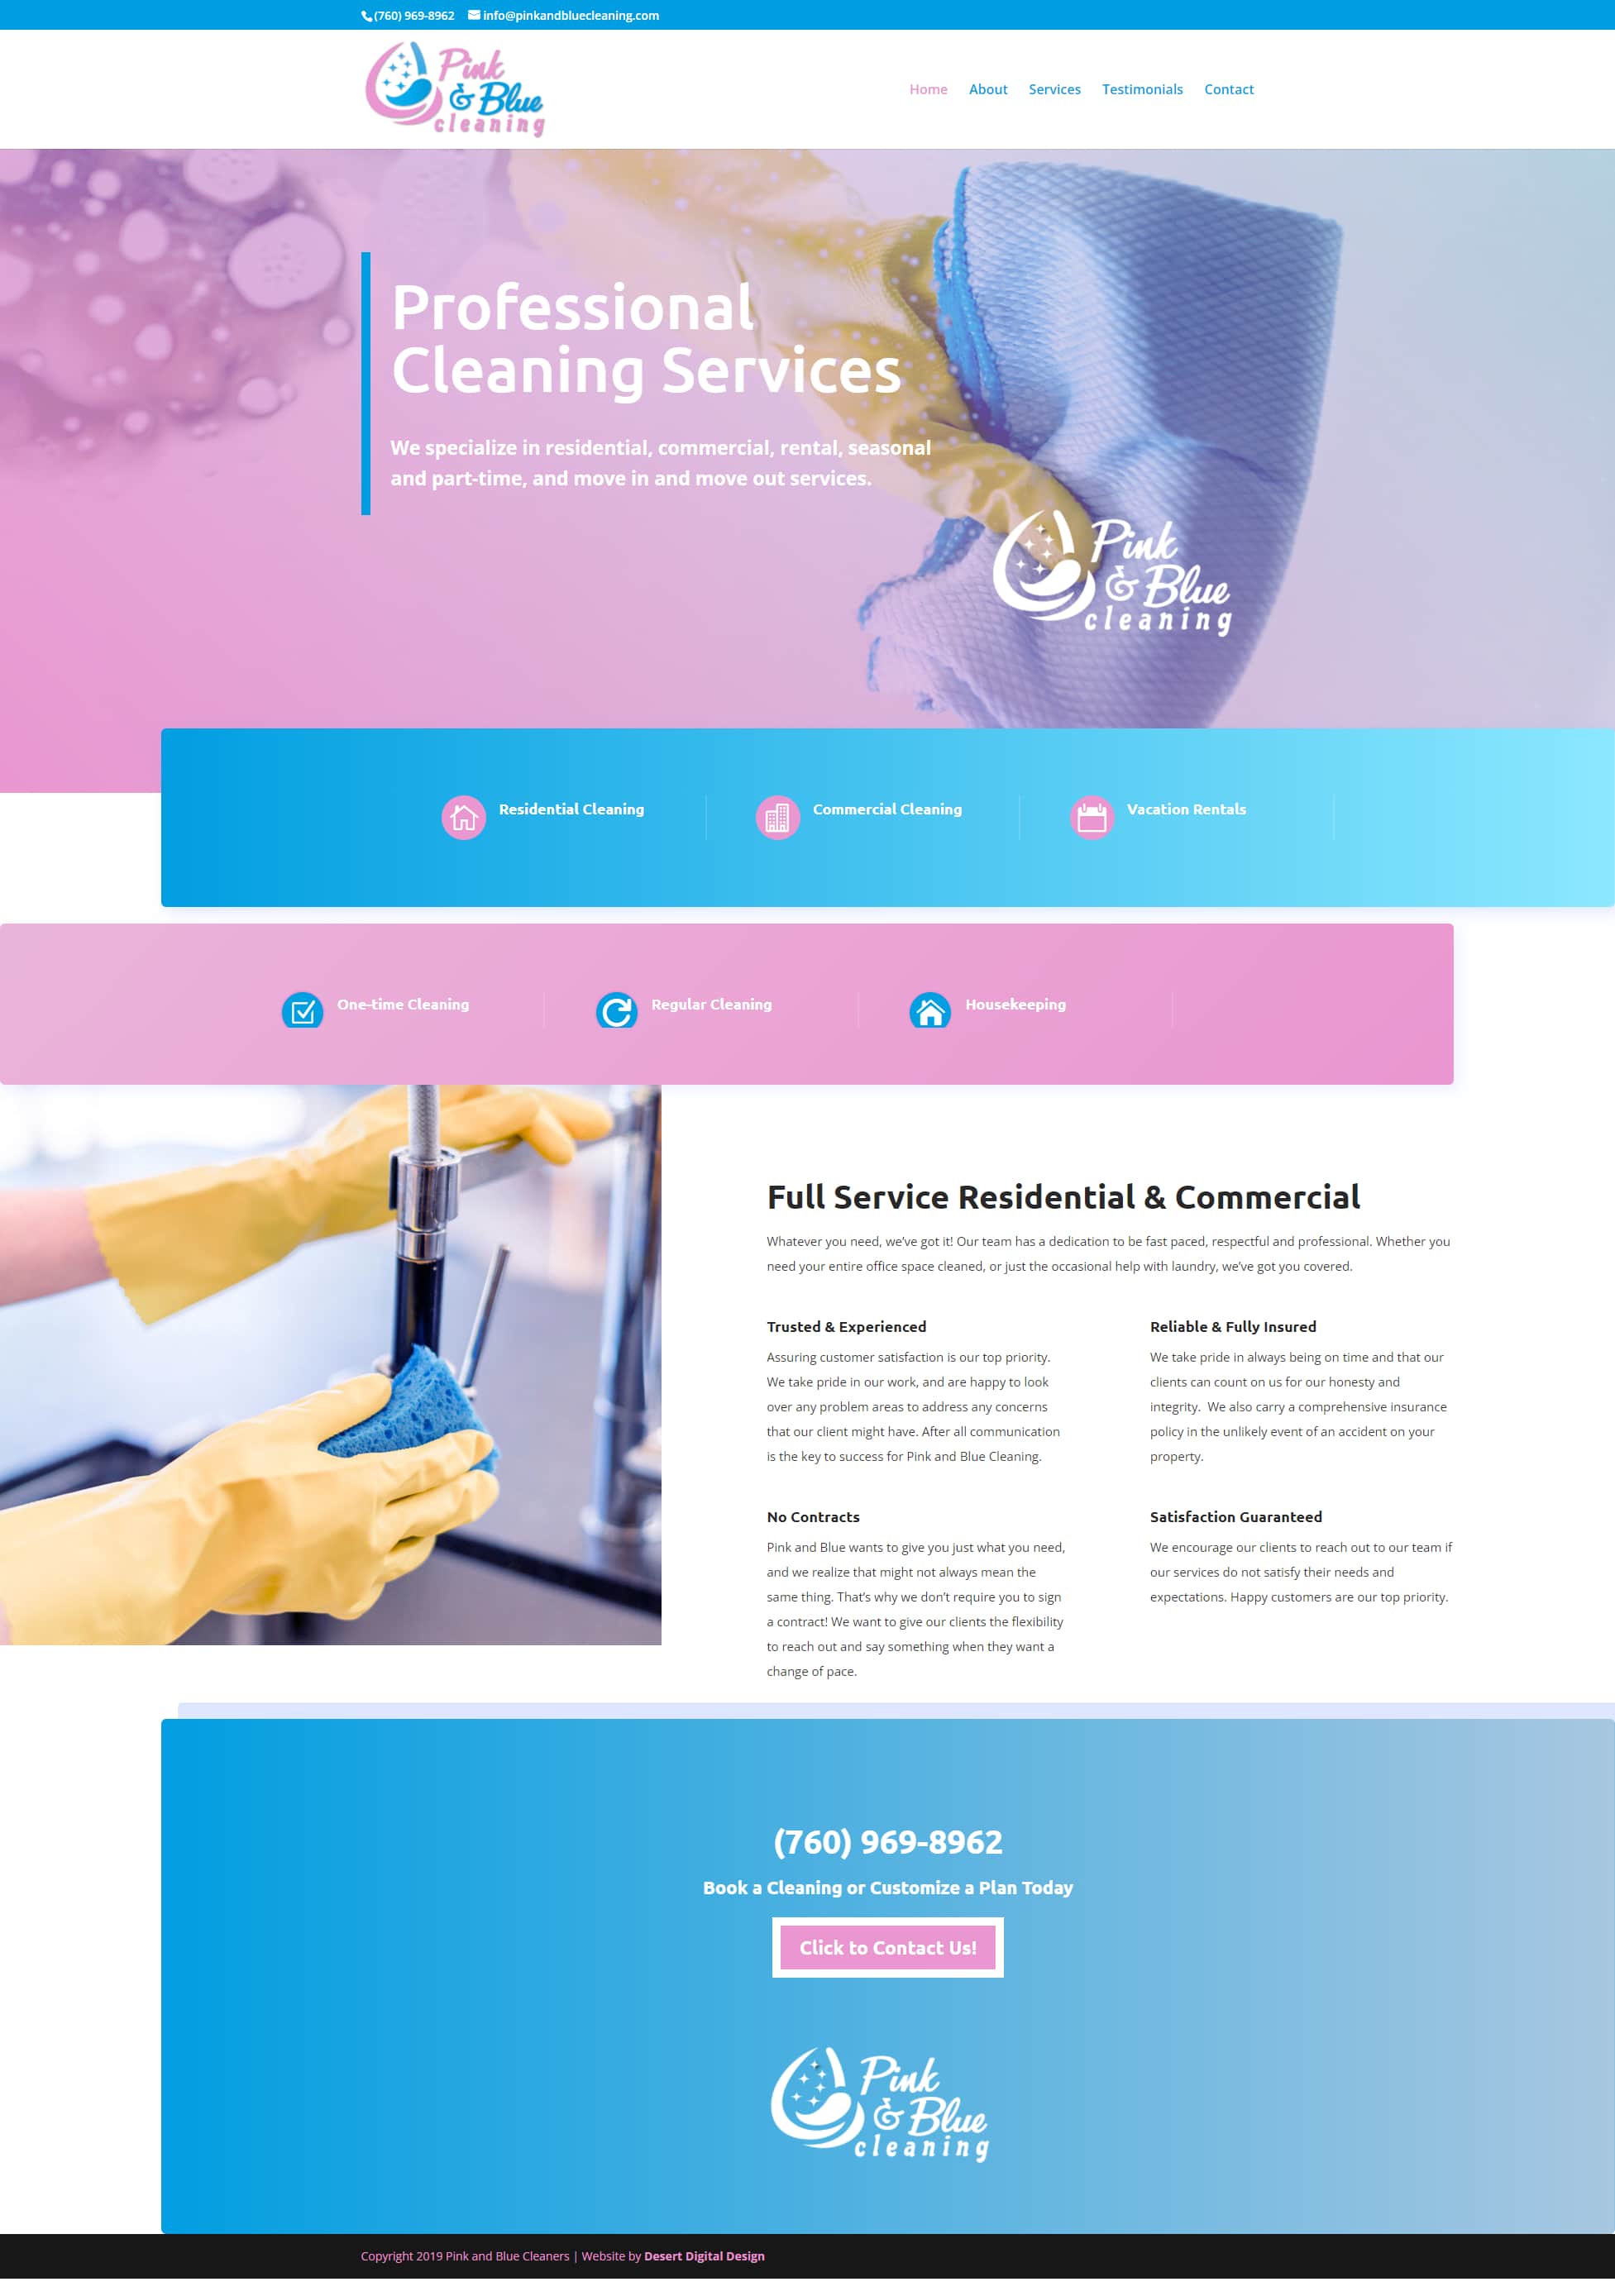 Pink & Blue Cleaning by Desert Digital Design in Palm Springs, CA.